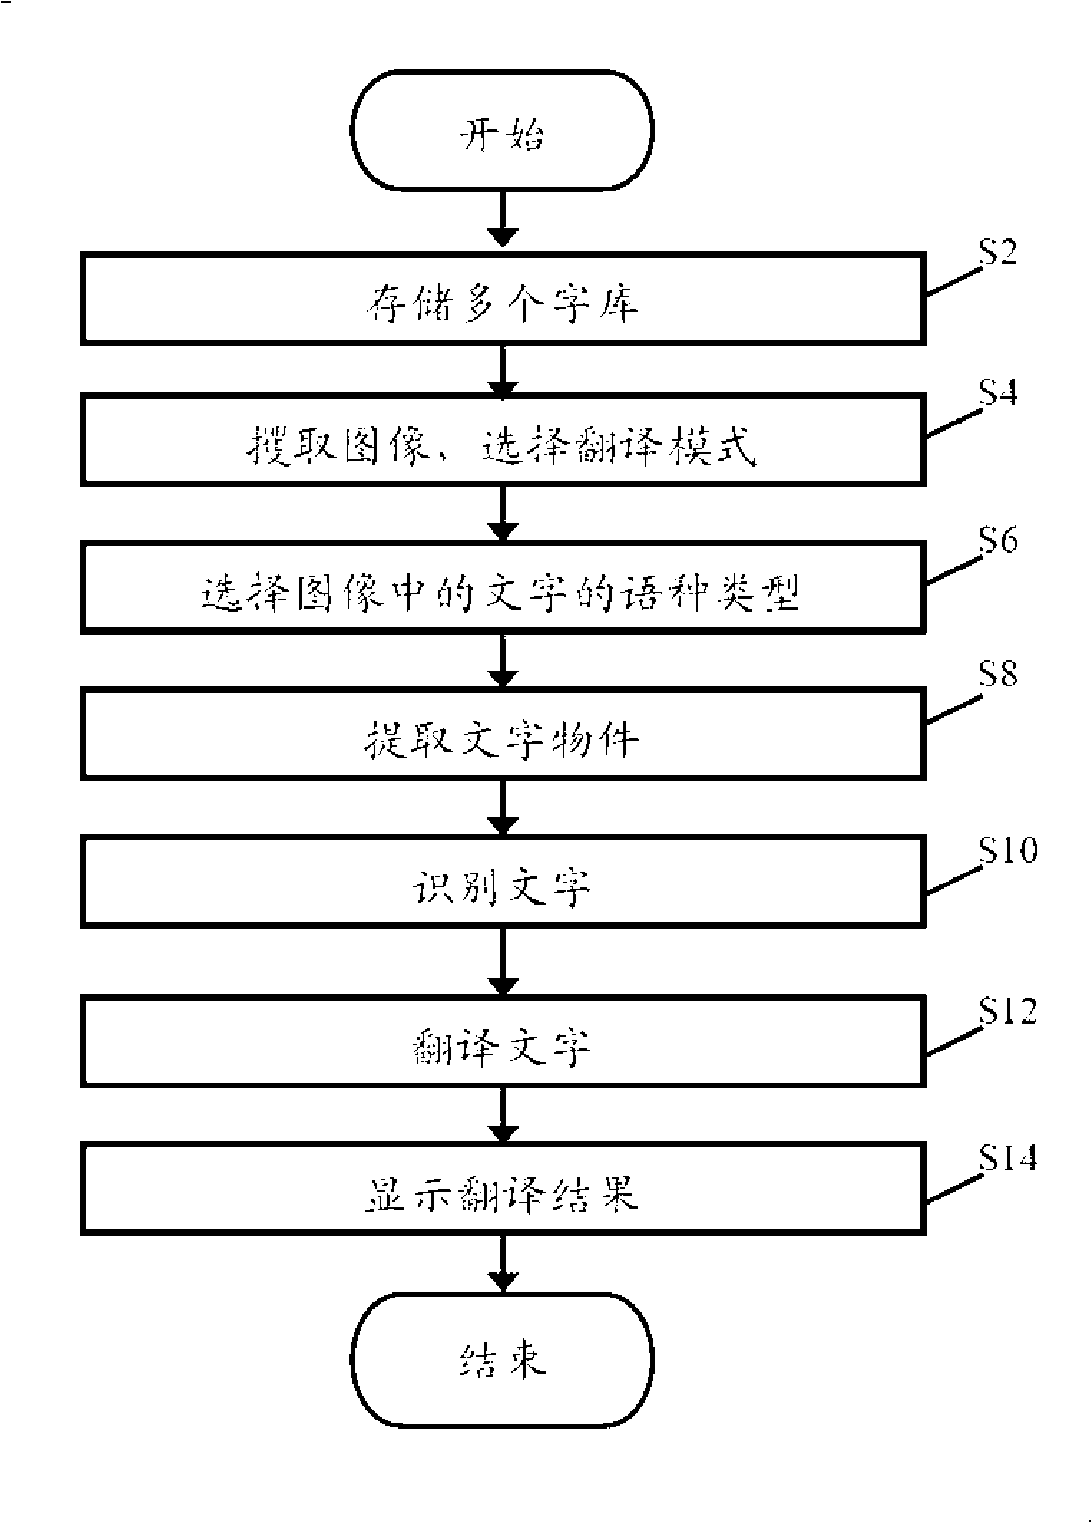 Apparatus and method for translating image and character